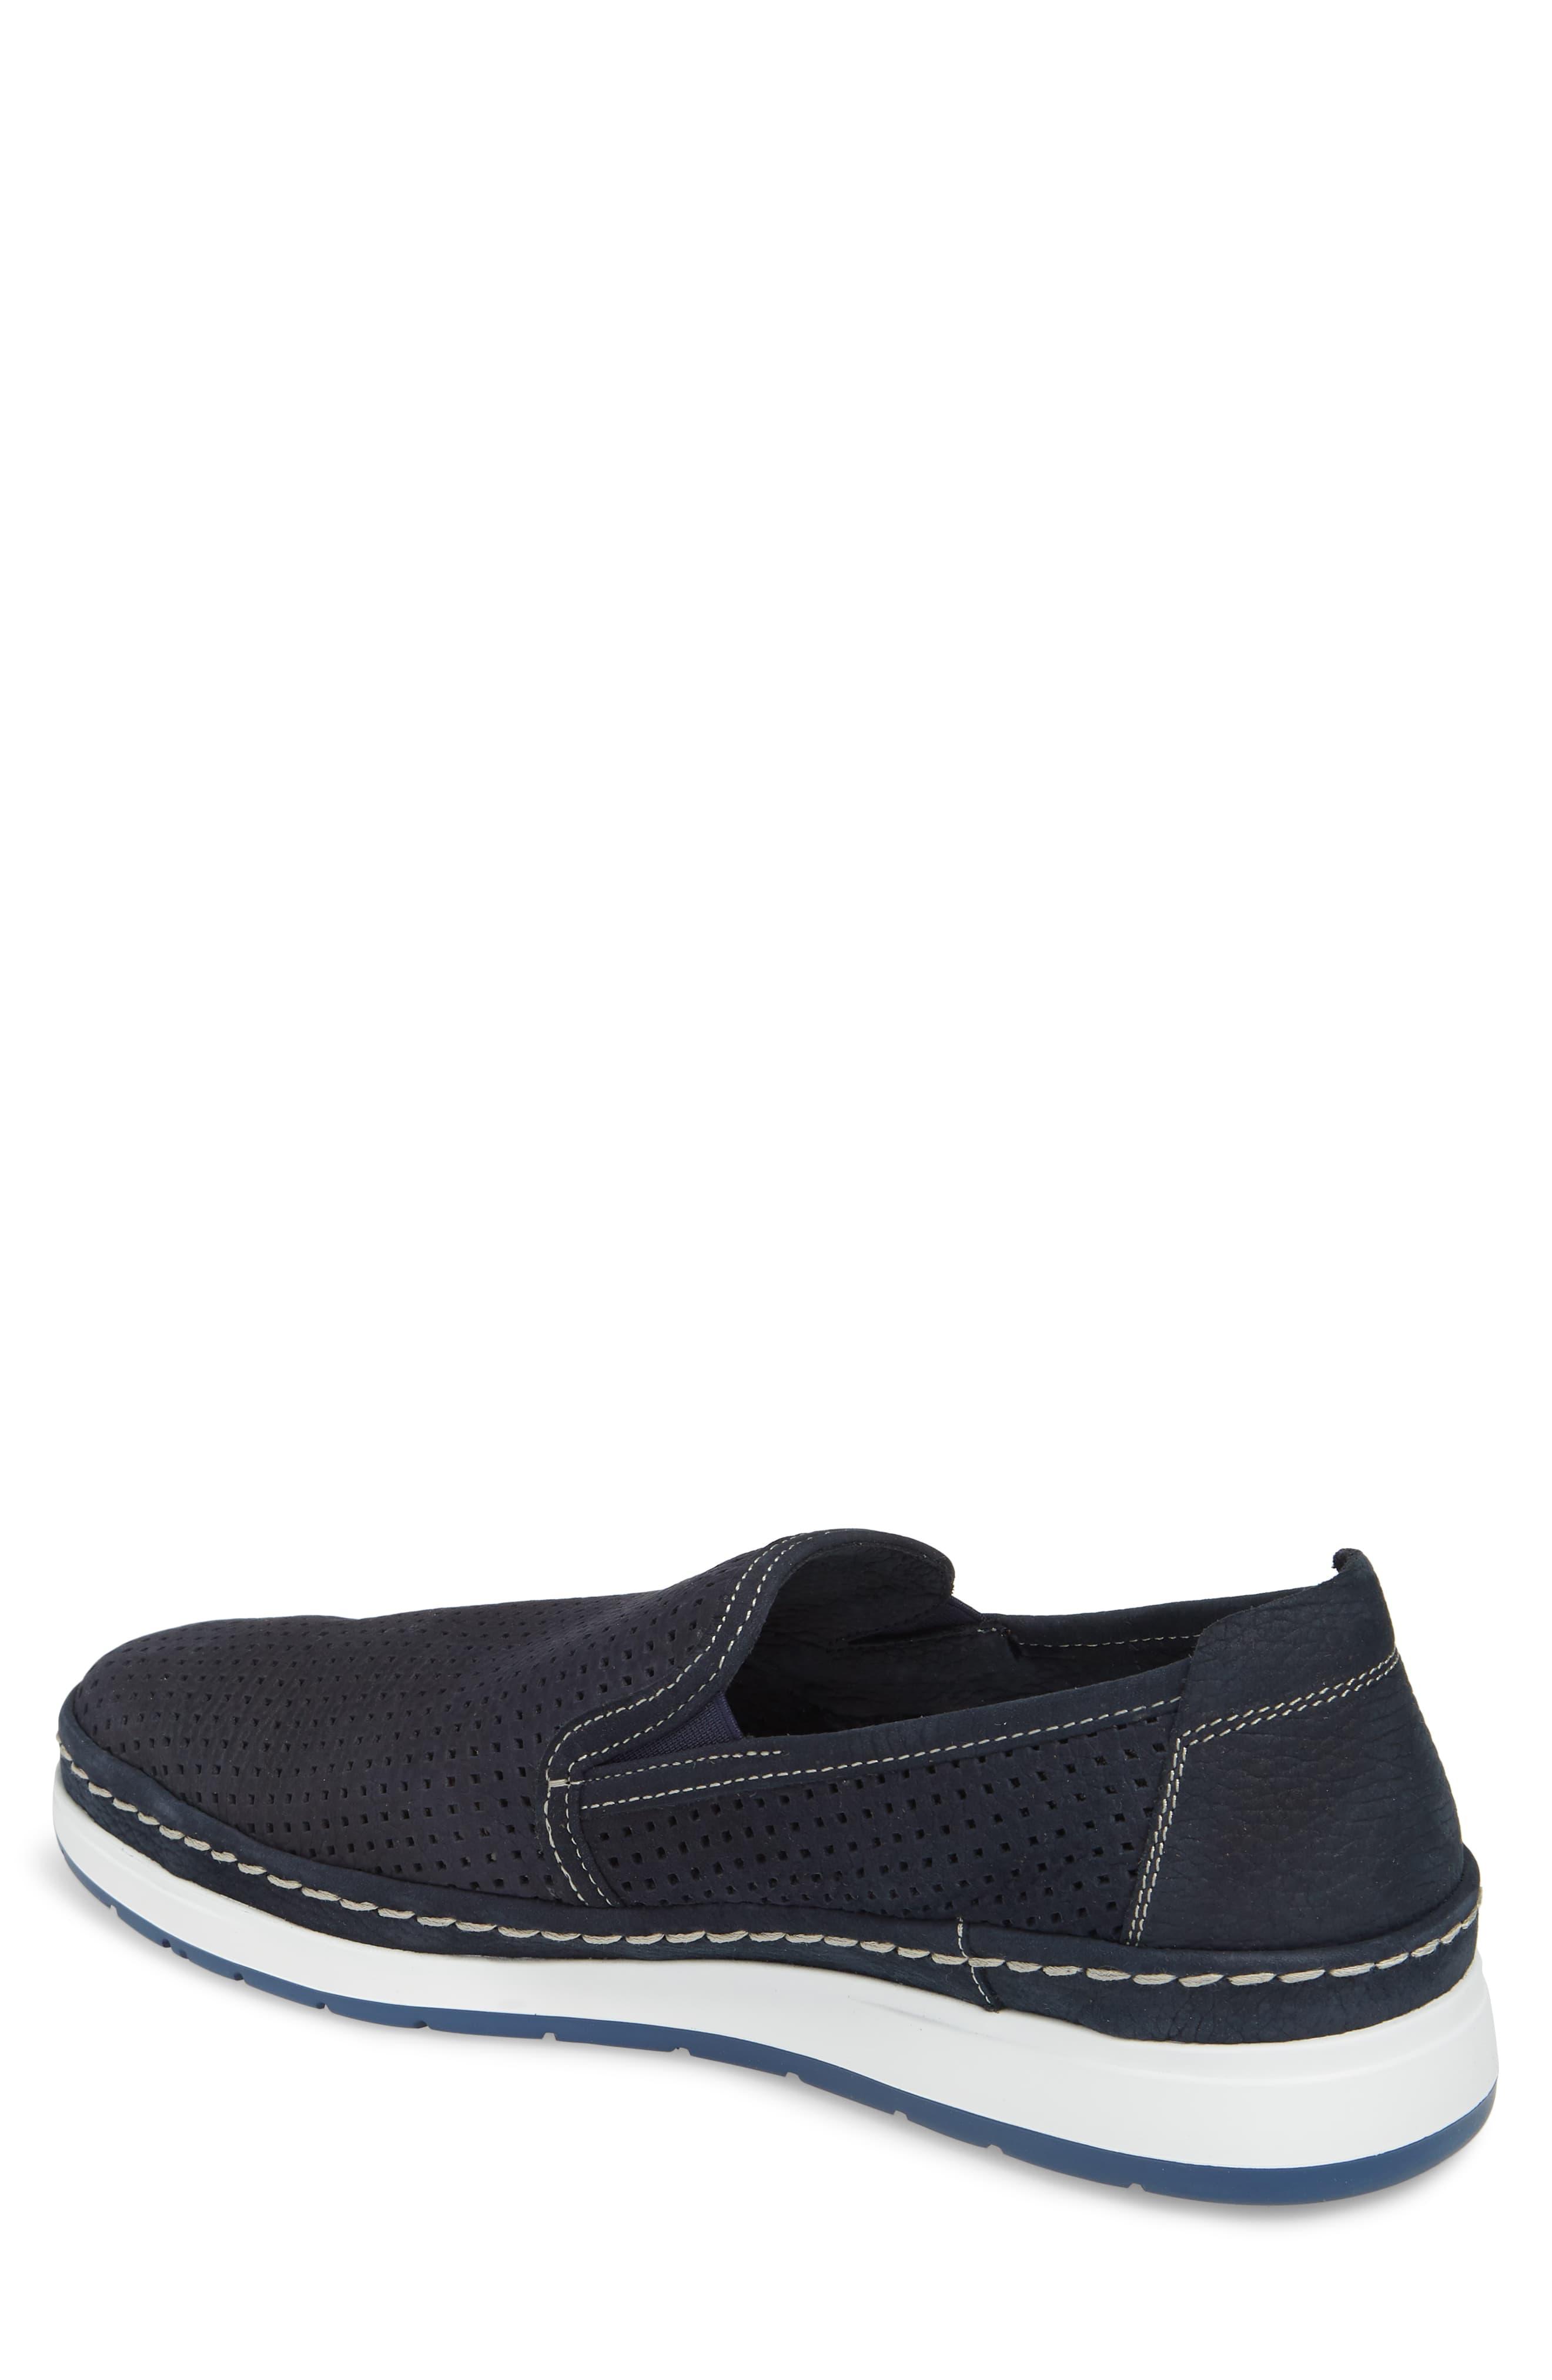 Mephisto Hadrian Perforated Slip On In Navy Blue For Men Lyst